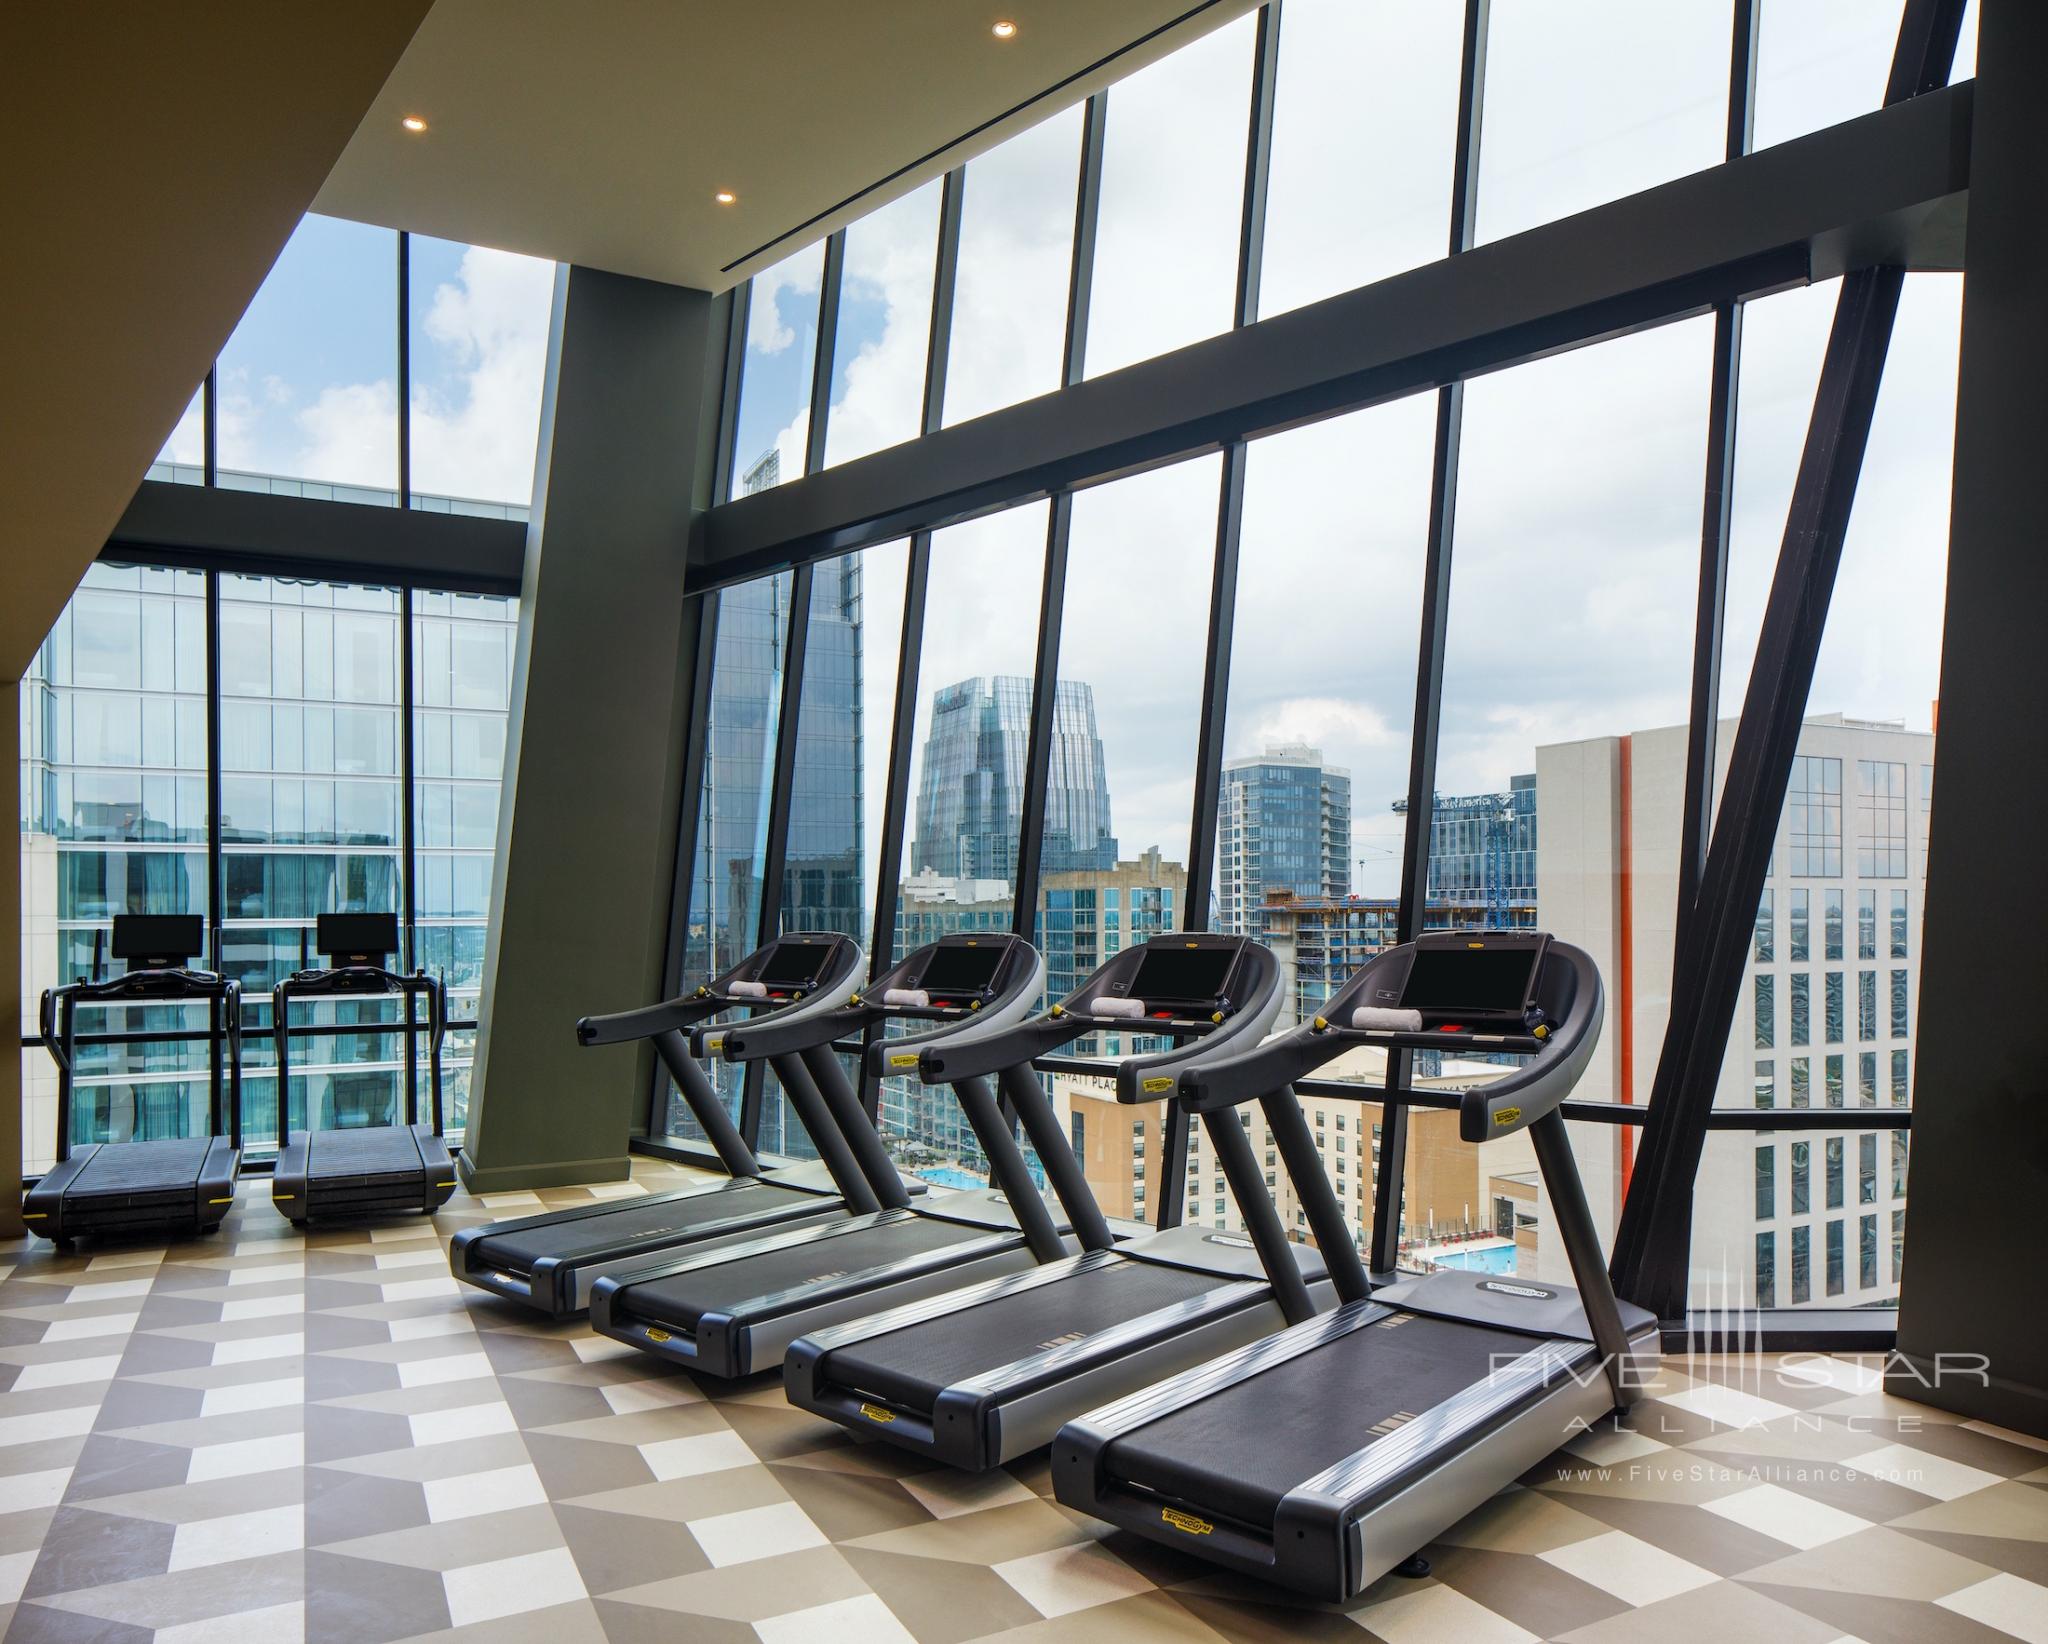 Guests at The Joseph can run with the clouds at the 21st-floor fitness center with inspiring views and the latest technology in workout equipment.